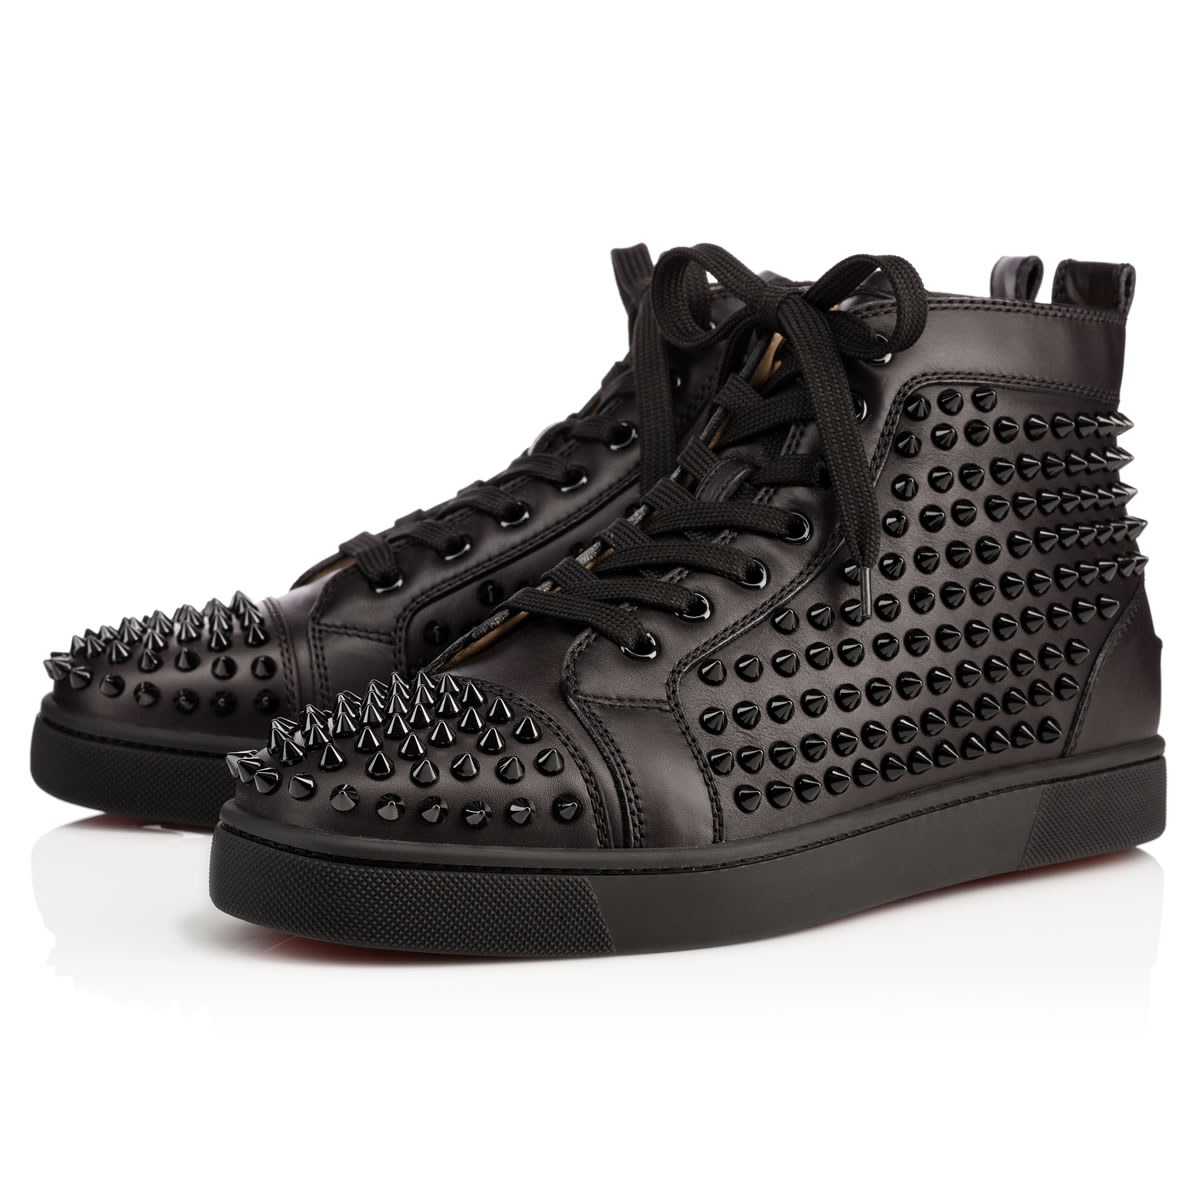 Spikes - Sneakers - Calf leather and spikes - Black - Christian